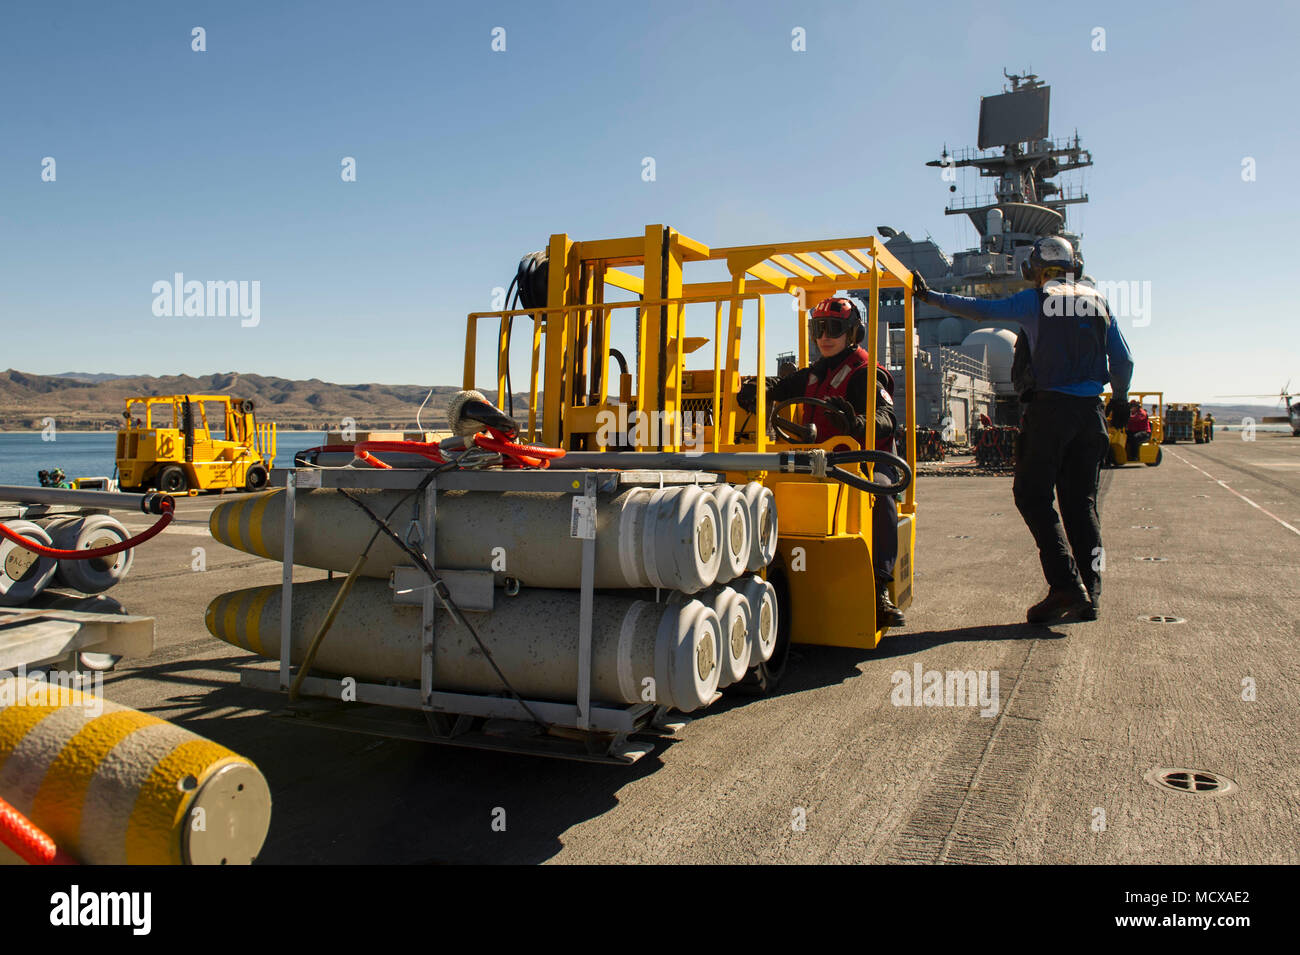 180305-N-ZS023-038  PACIFIC OCEAN (March 5, 2018) Aviation Ordnanceman Airman Tanner Priem, assigned to the amphibious assault ship USS America (LHA 6), moves ordnance using a forklift on the flight deck. America is underway off the coast of southern California conducting an ammunitions offload prior to entering a planned maintenance availability period. (U.S. Navy photo by Mass Communication Specialist 3rd Class Vance Hand/Released) Stock Photo